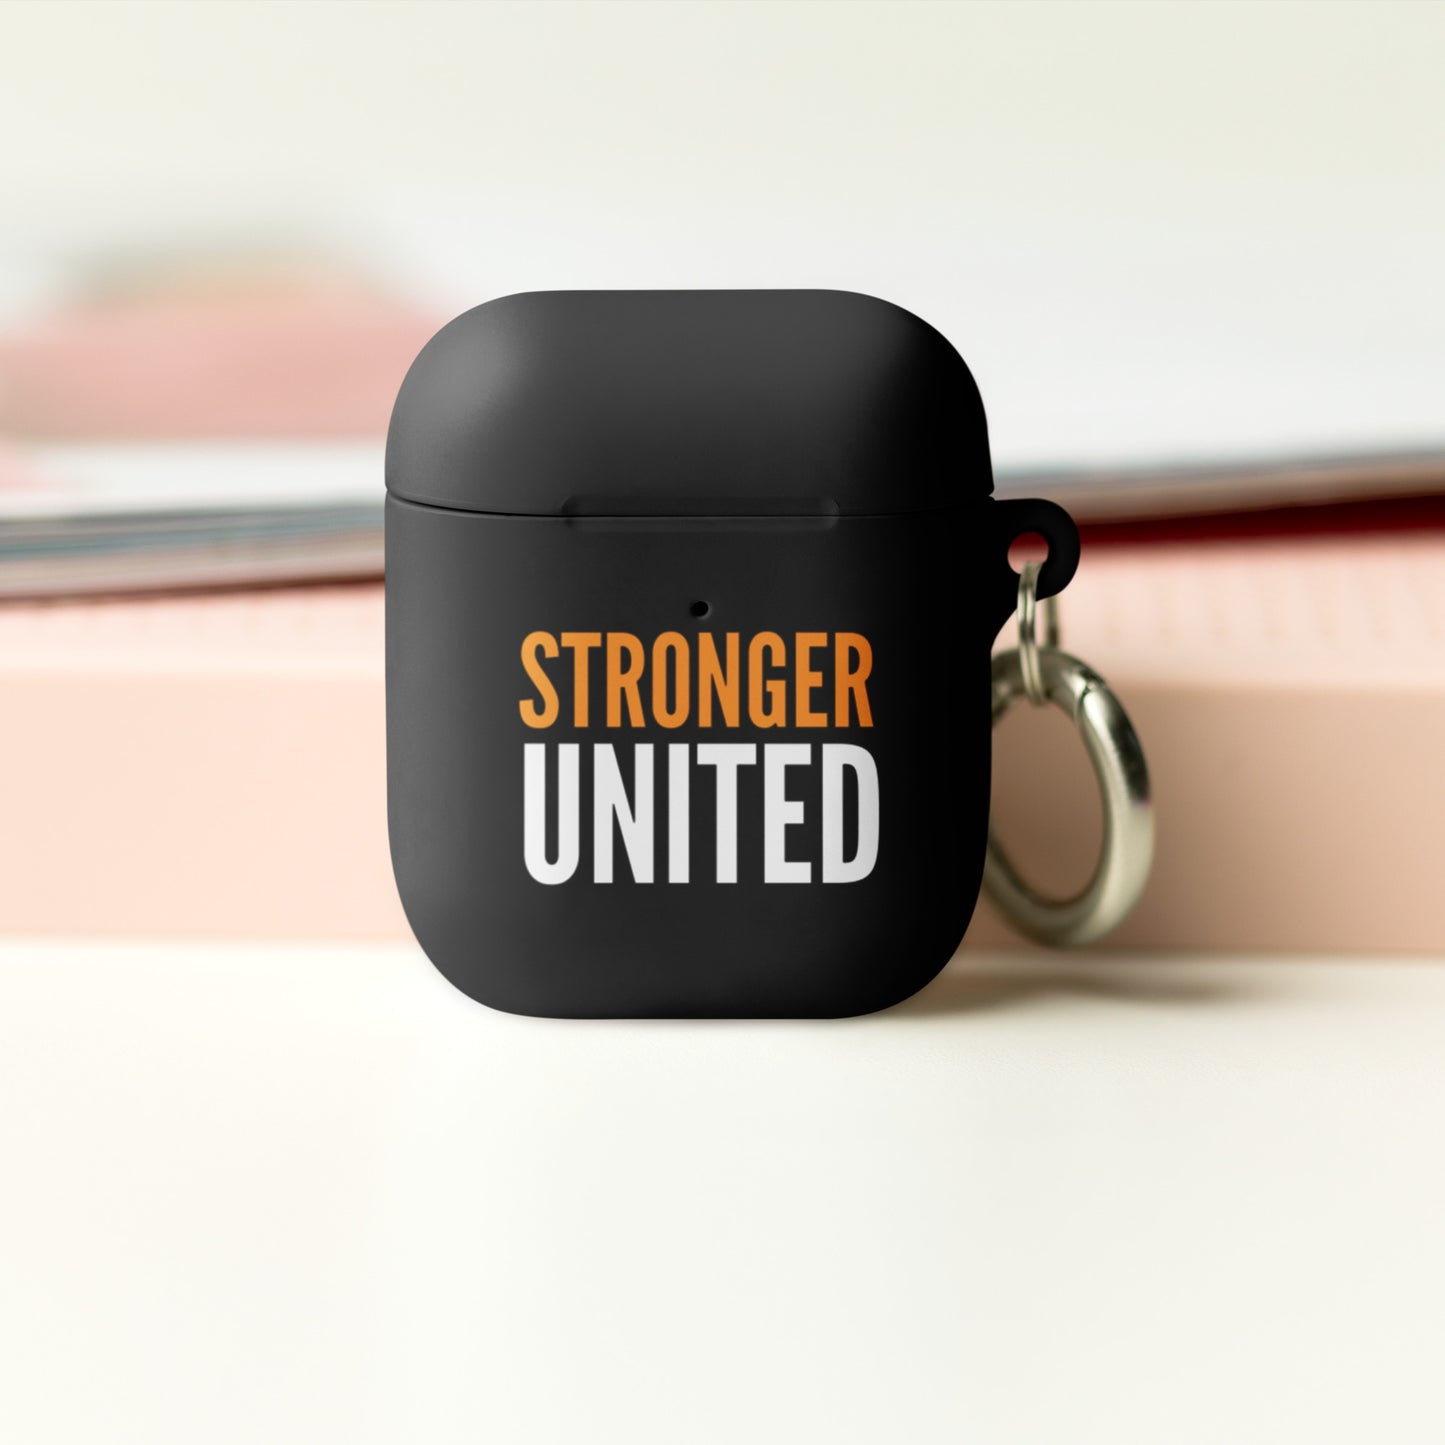 Stronger United AirPods case